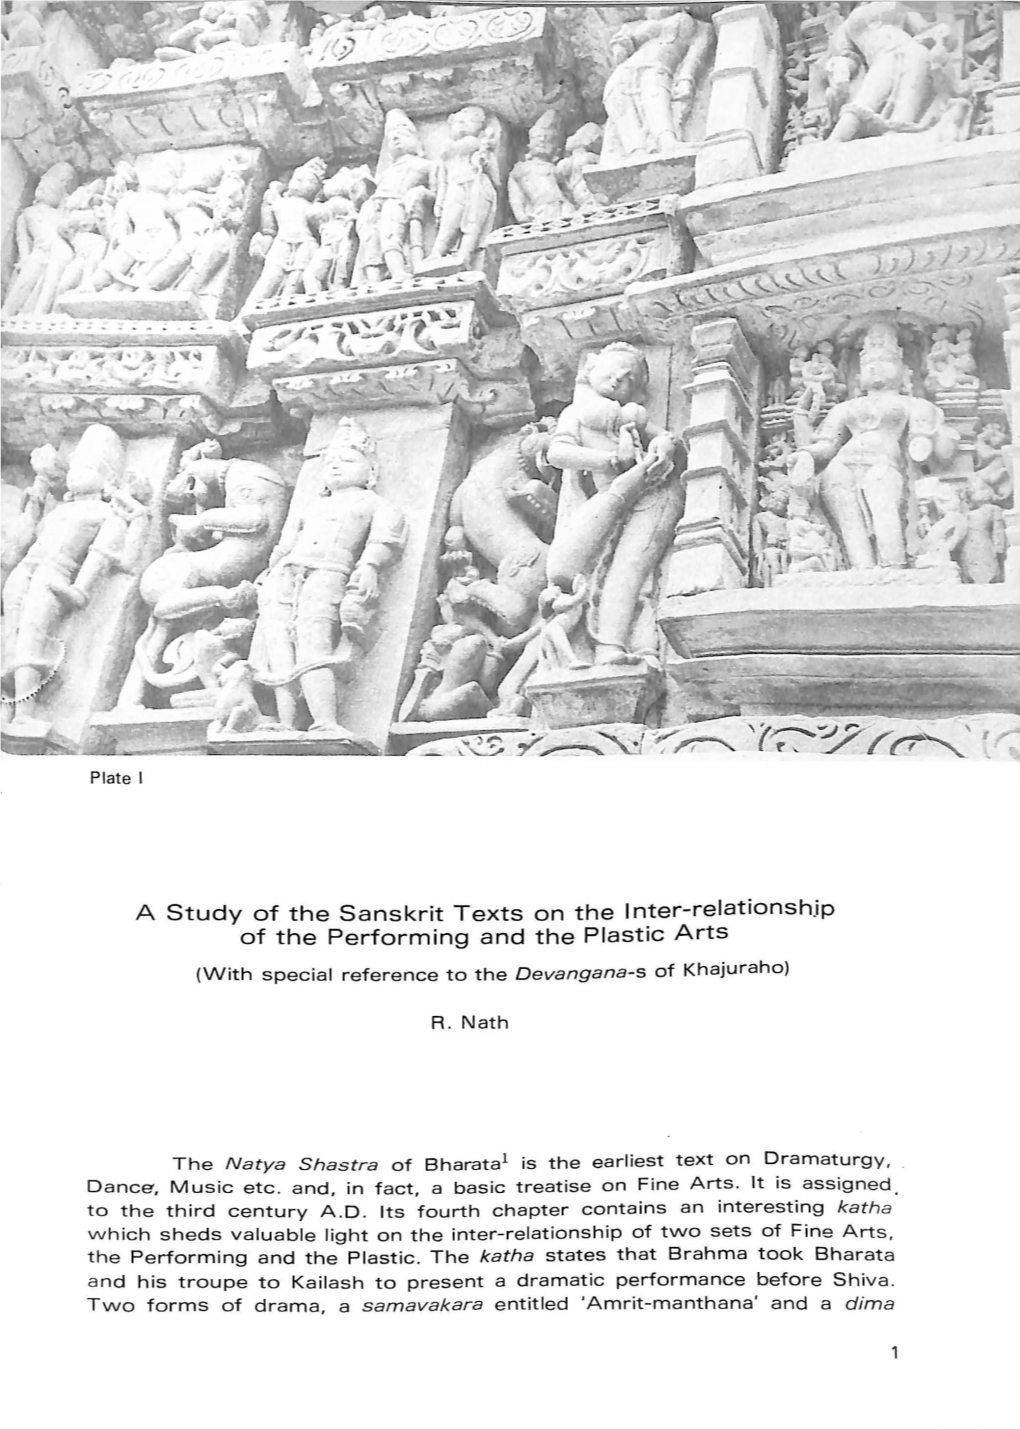 A Study of the Sanskrit Texts on the Lnter-Relationsh Ip of the Performing and the Plastic Arts